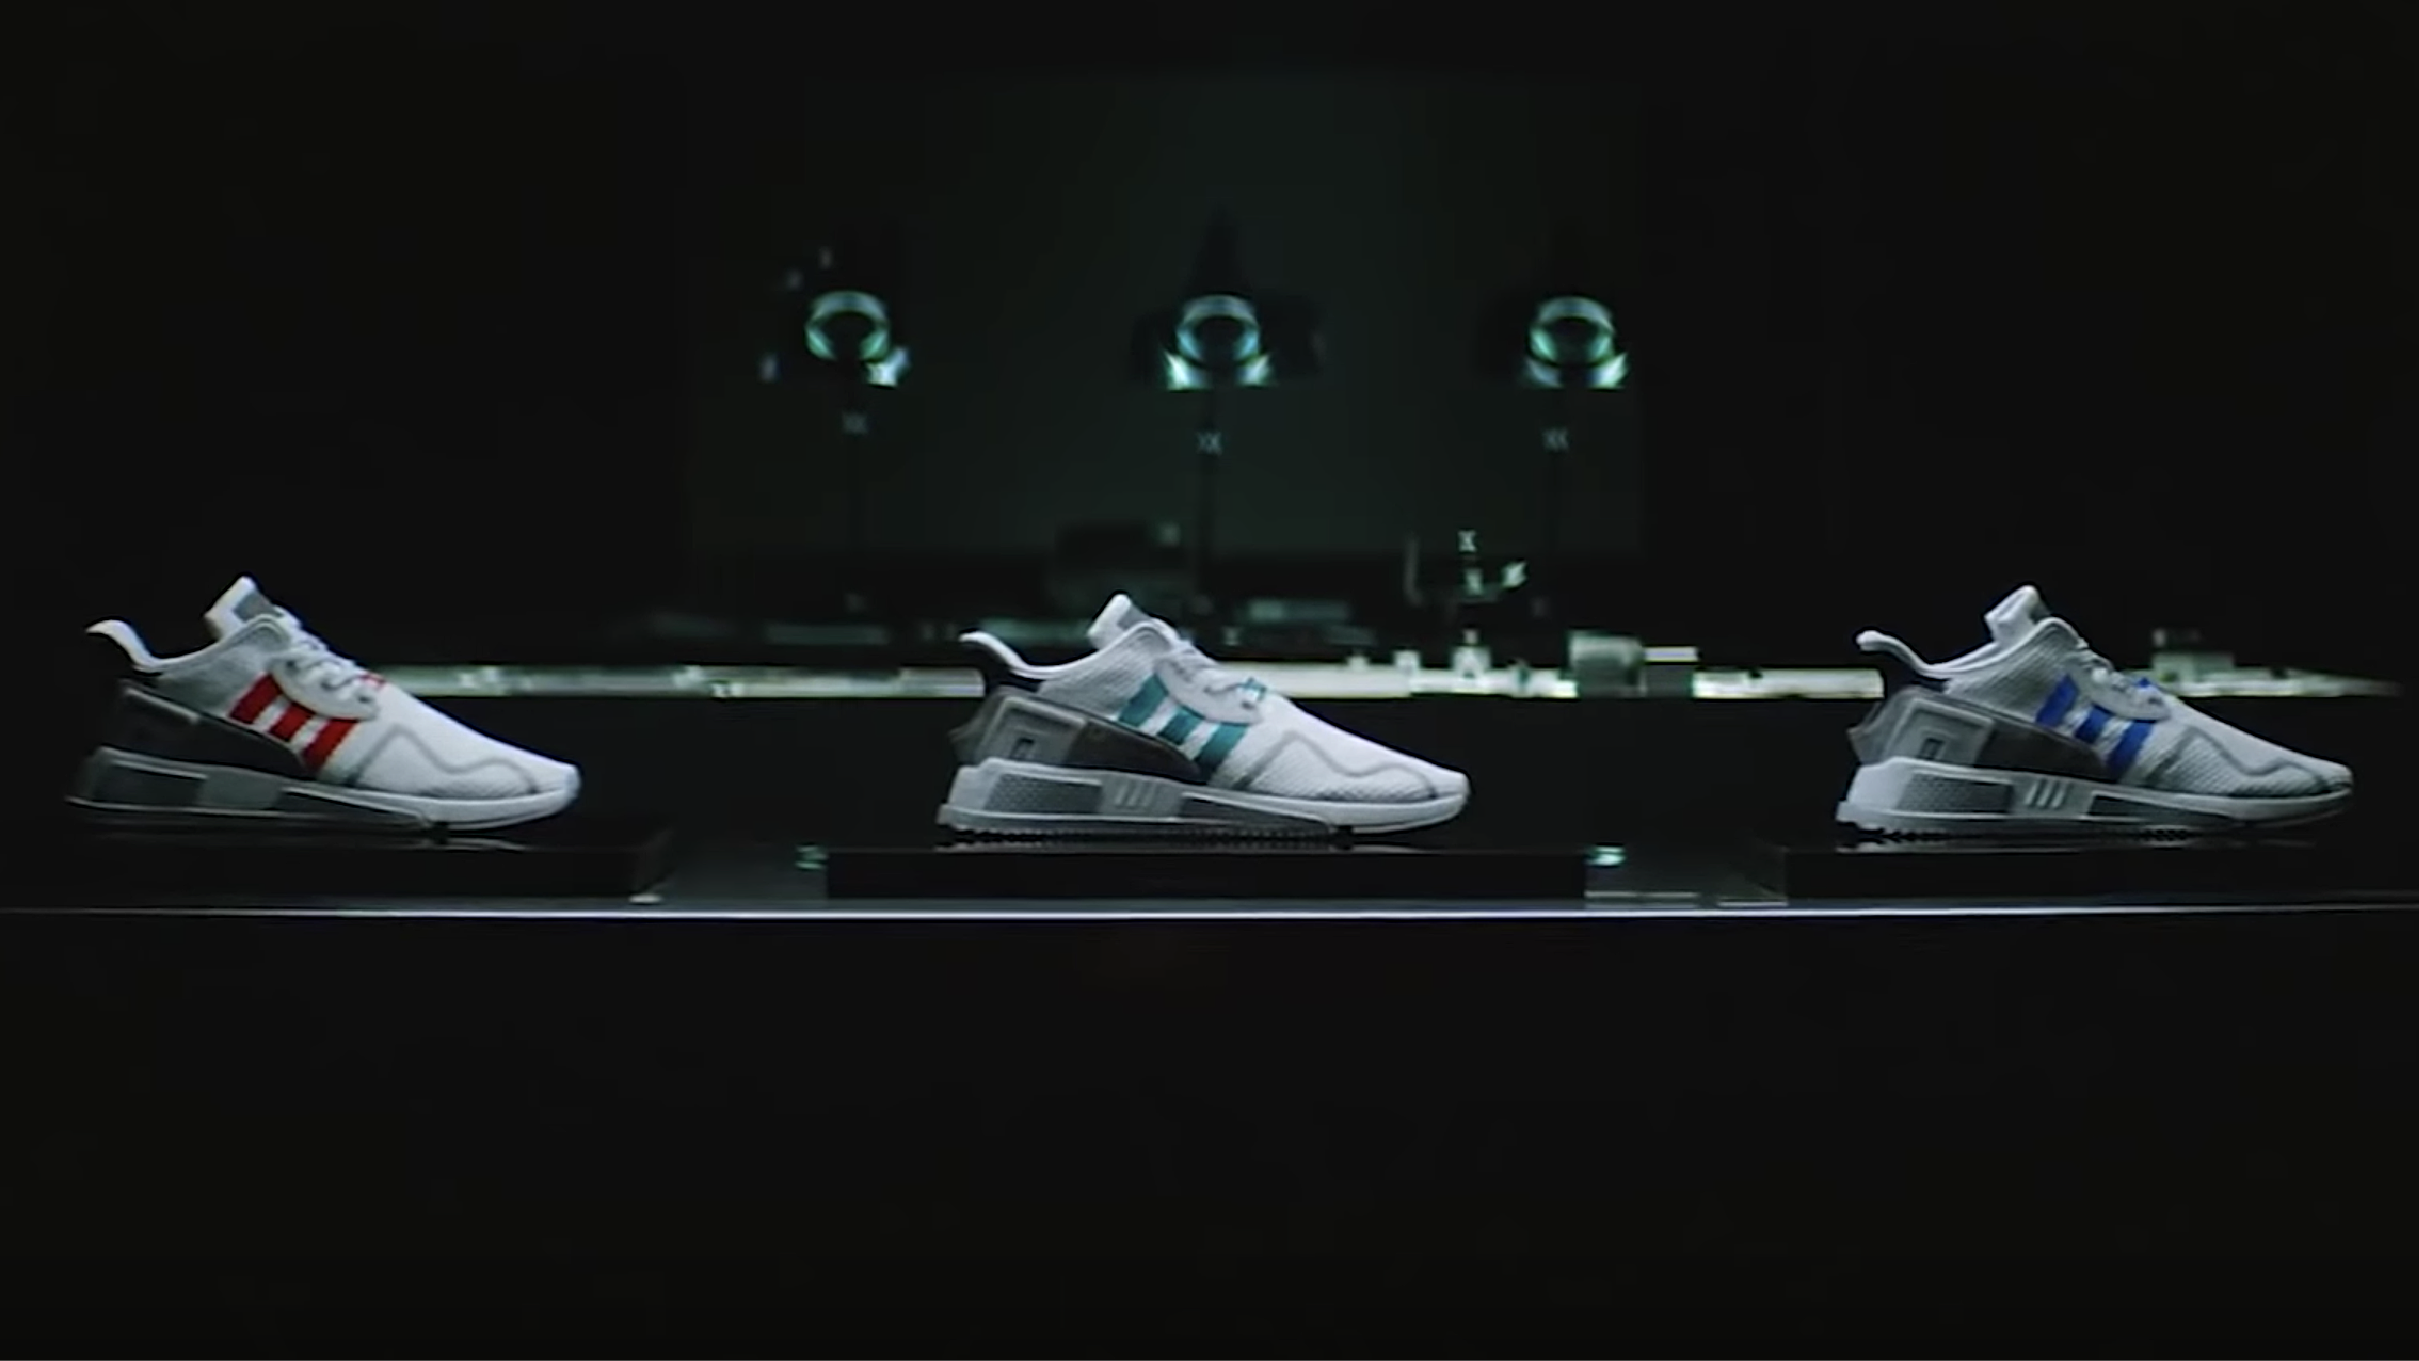 How collaborative marketing and insights helped Adidas - Think with Google